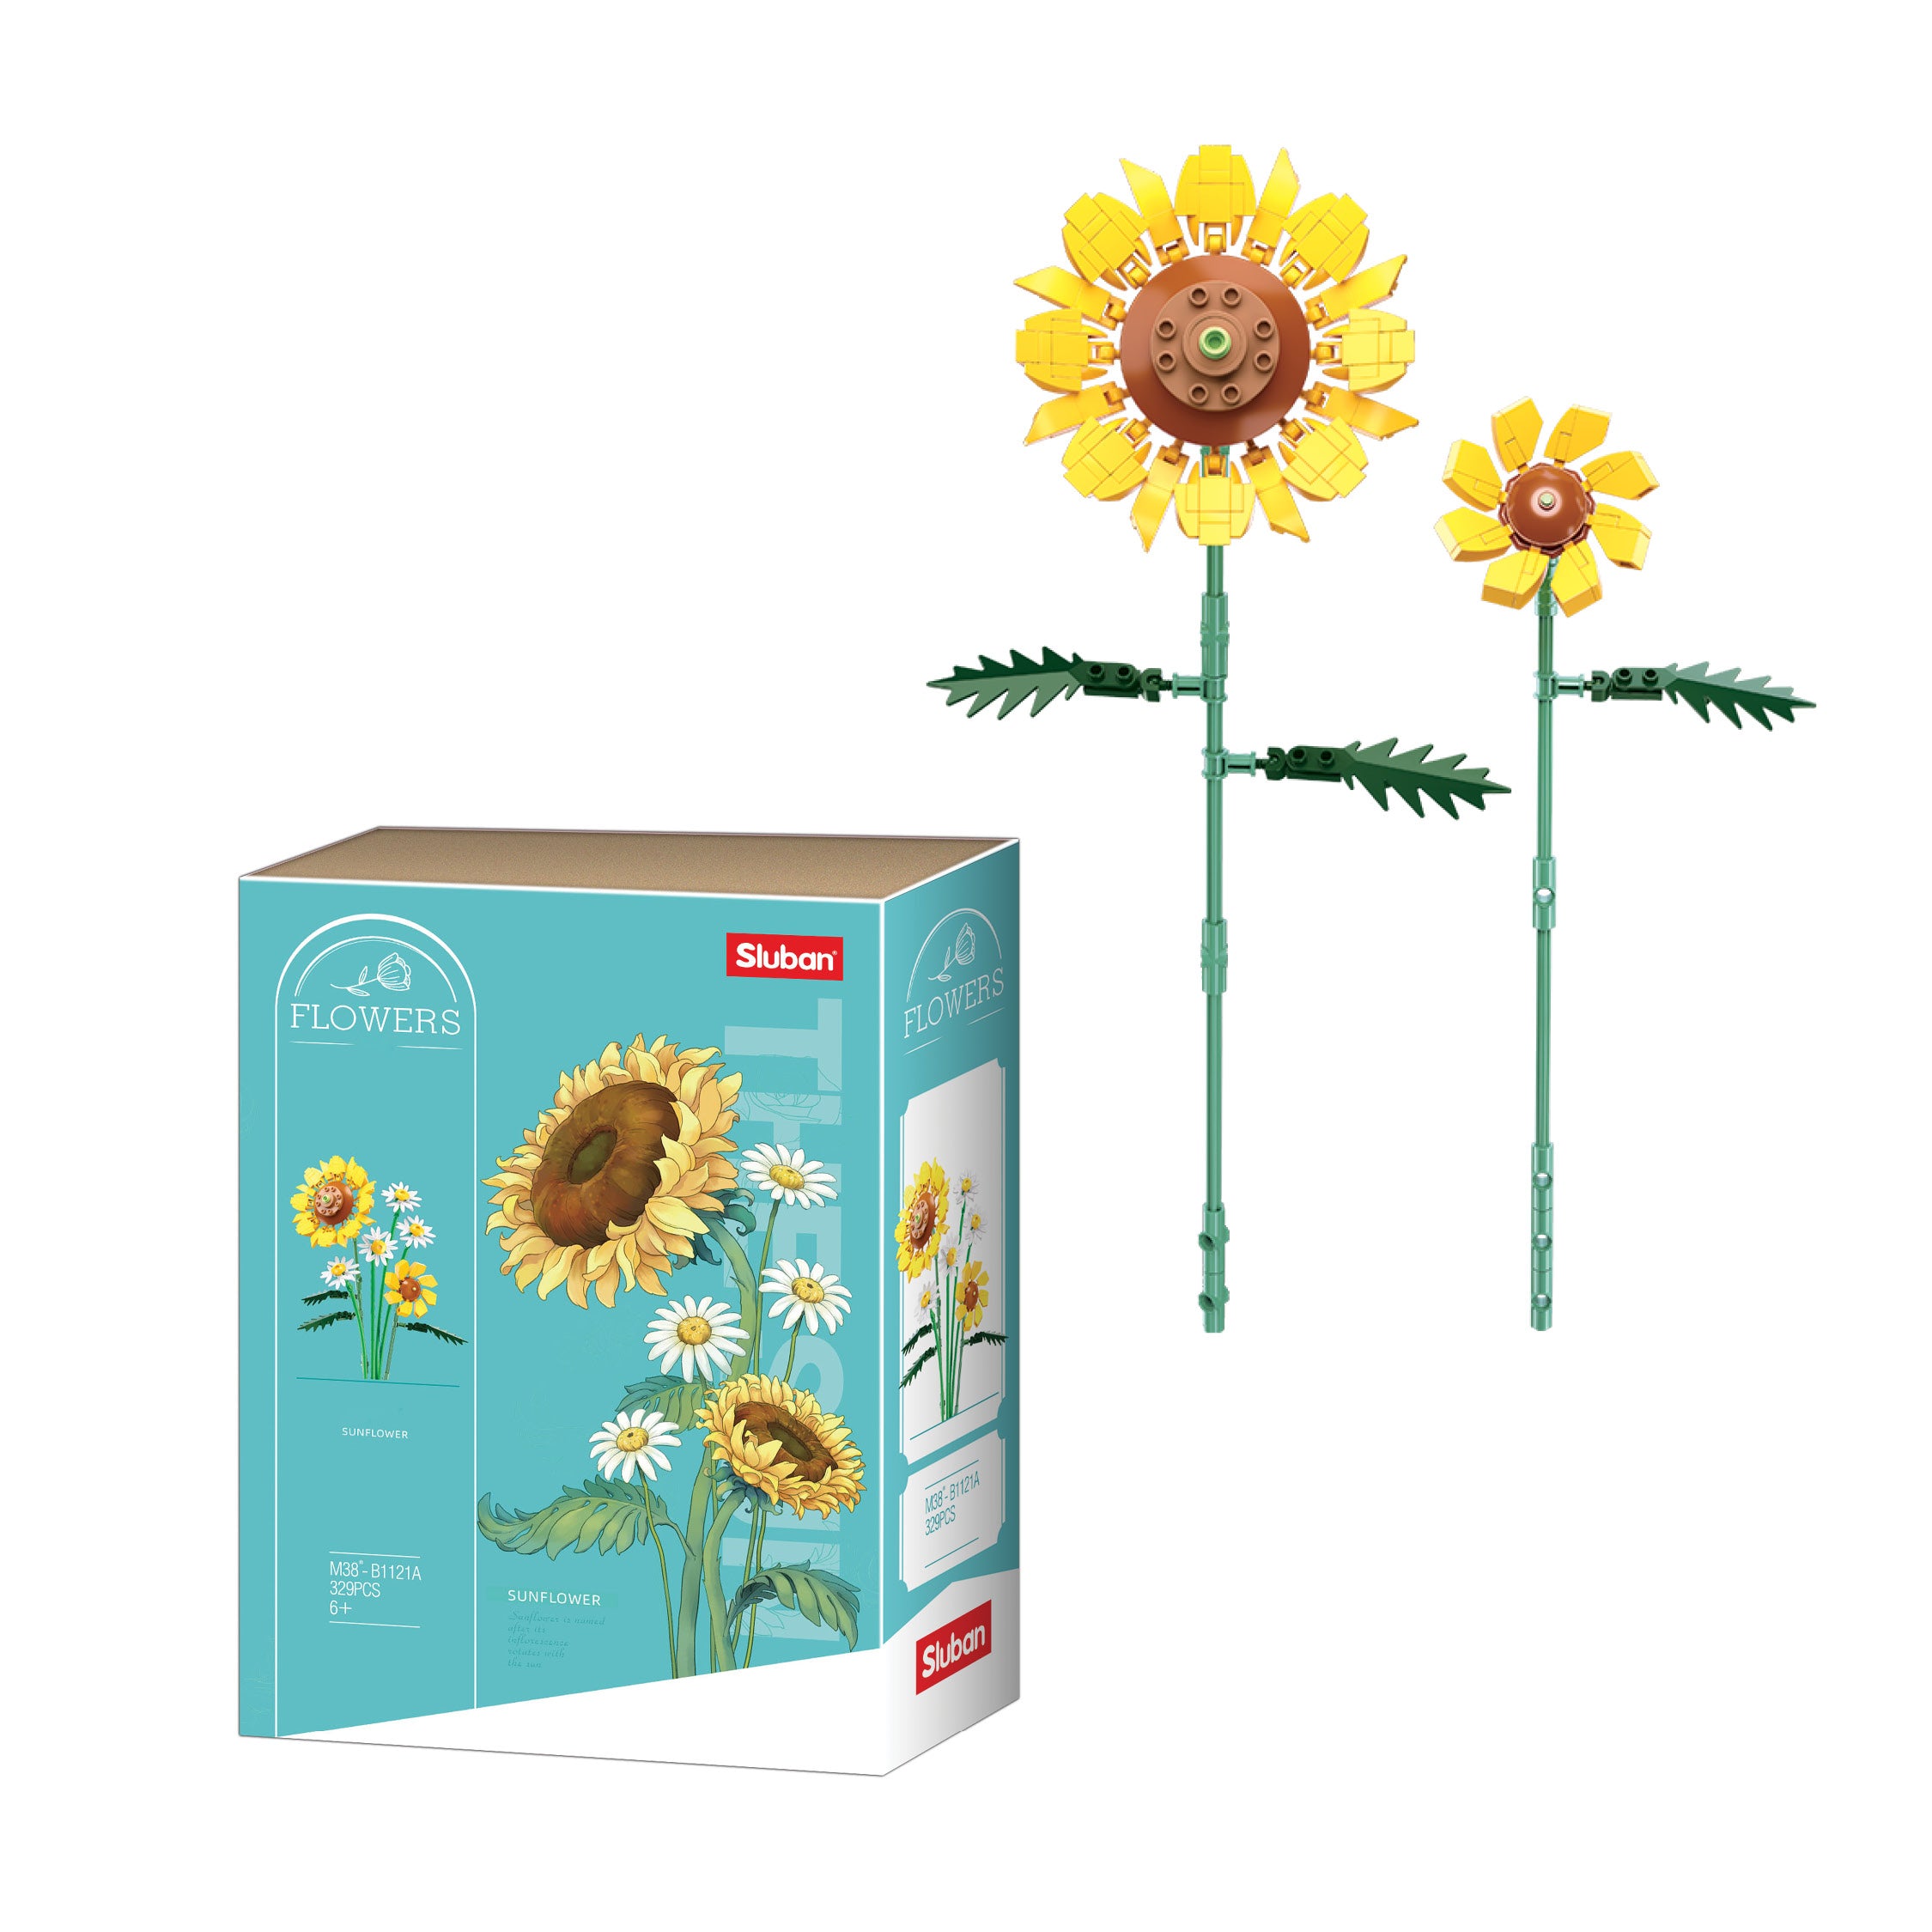 SLUBAN® Sunflower– 325 pcs (M38-B1121A) Building Blocks Kit For Boys And  Girls Aged 6 Years And Above Creative Construction Set Educational STEM Toy, Ideal for Gifting Birthday Gift Return Gift, Blocks compatible with other leading brands, BIS certified.